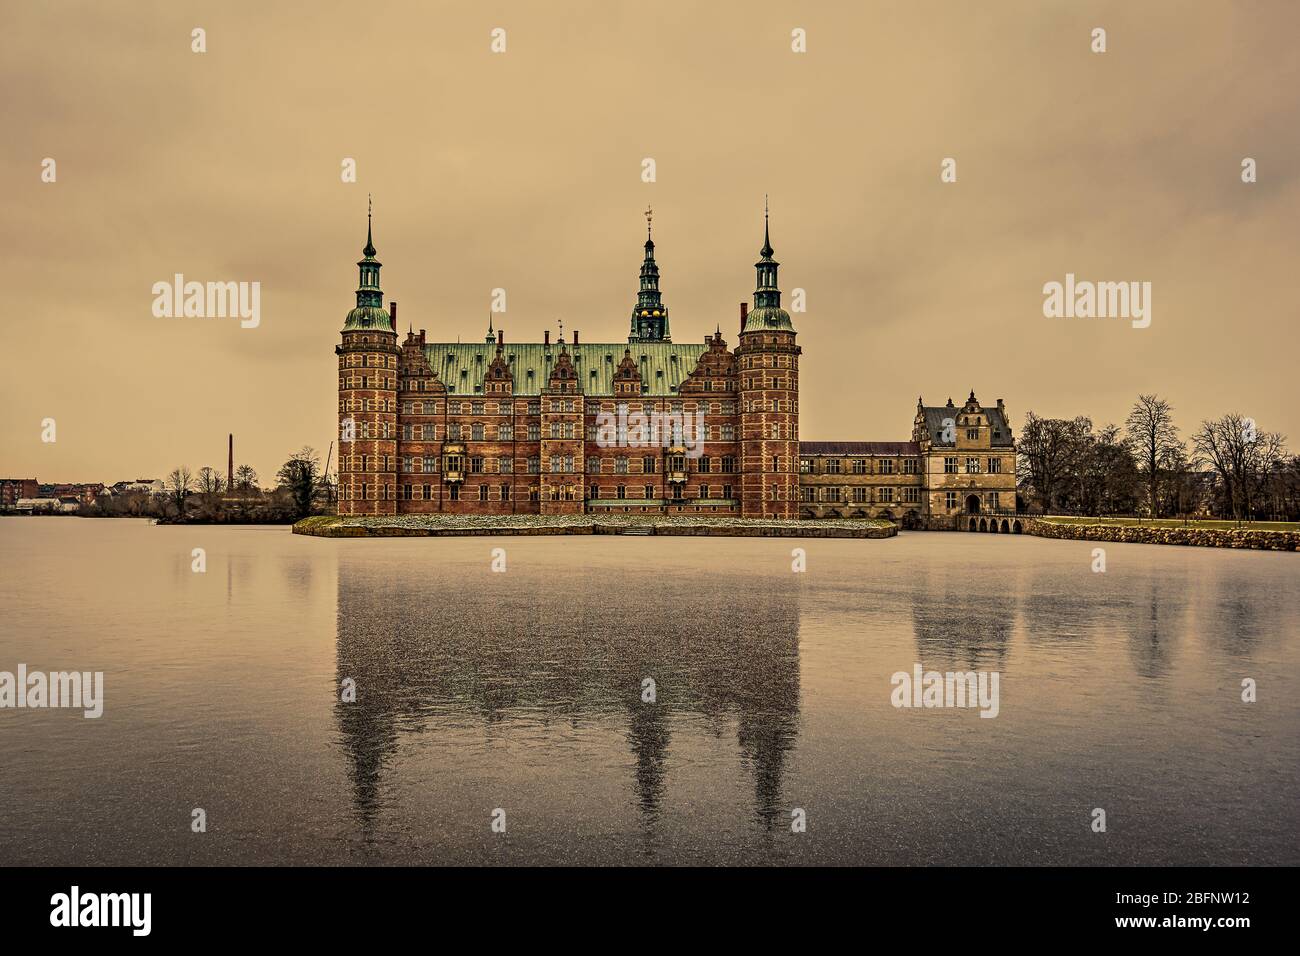 Wintertime and reflections in the thin ice on the lake at Frederiksborg Castle, Hillerod, Denmark, February 6, 2018 Stock Photo